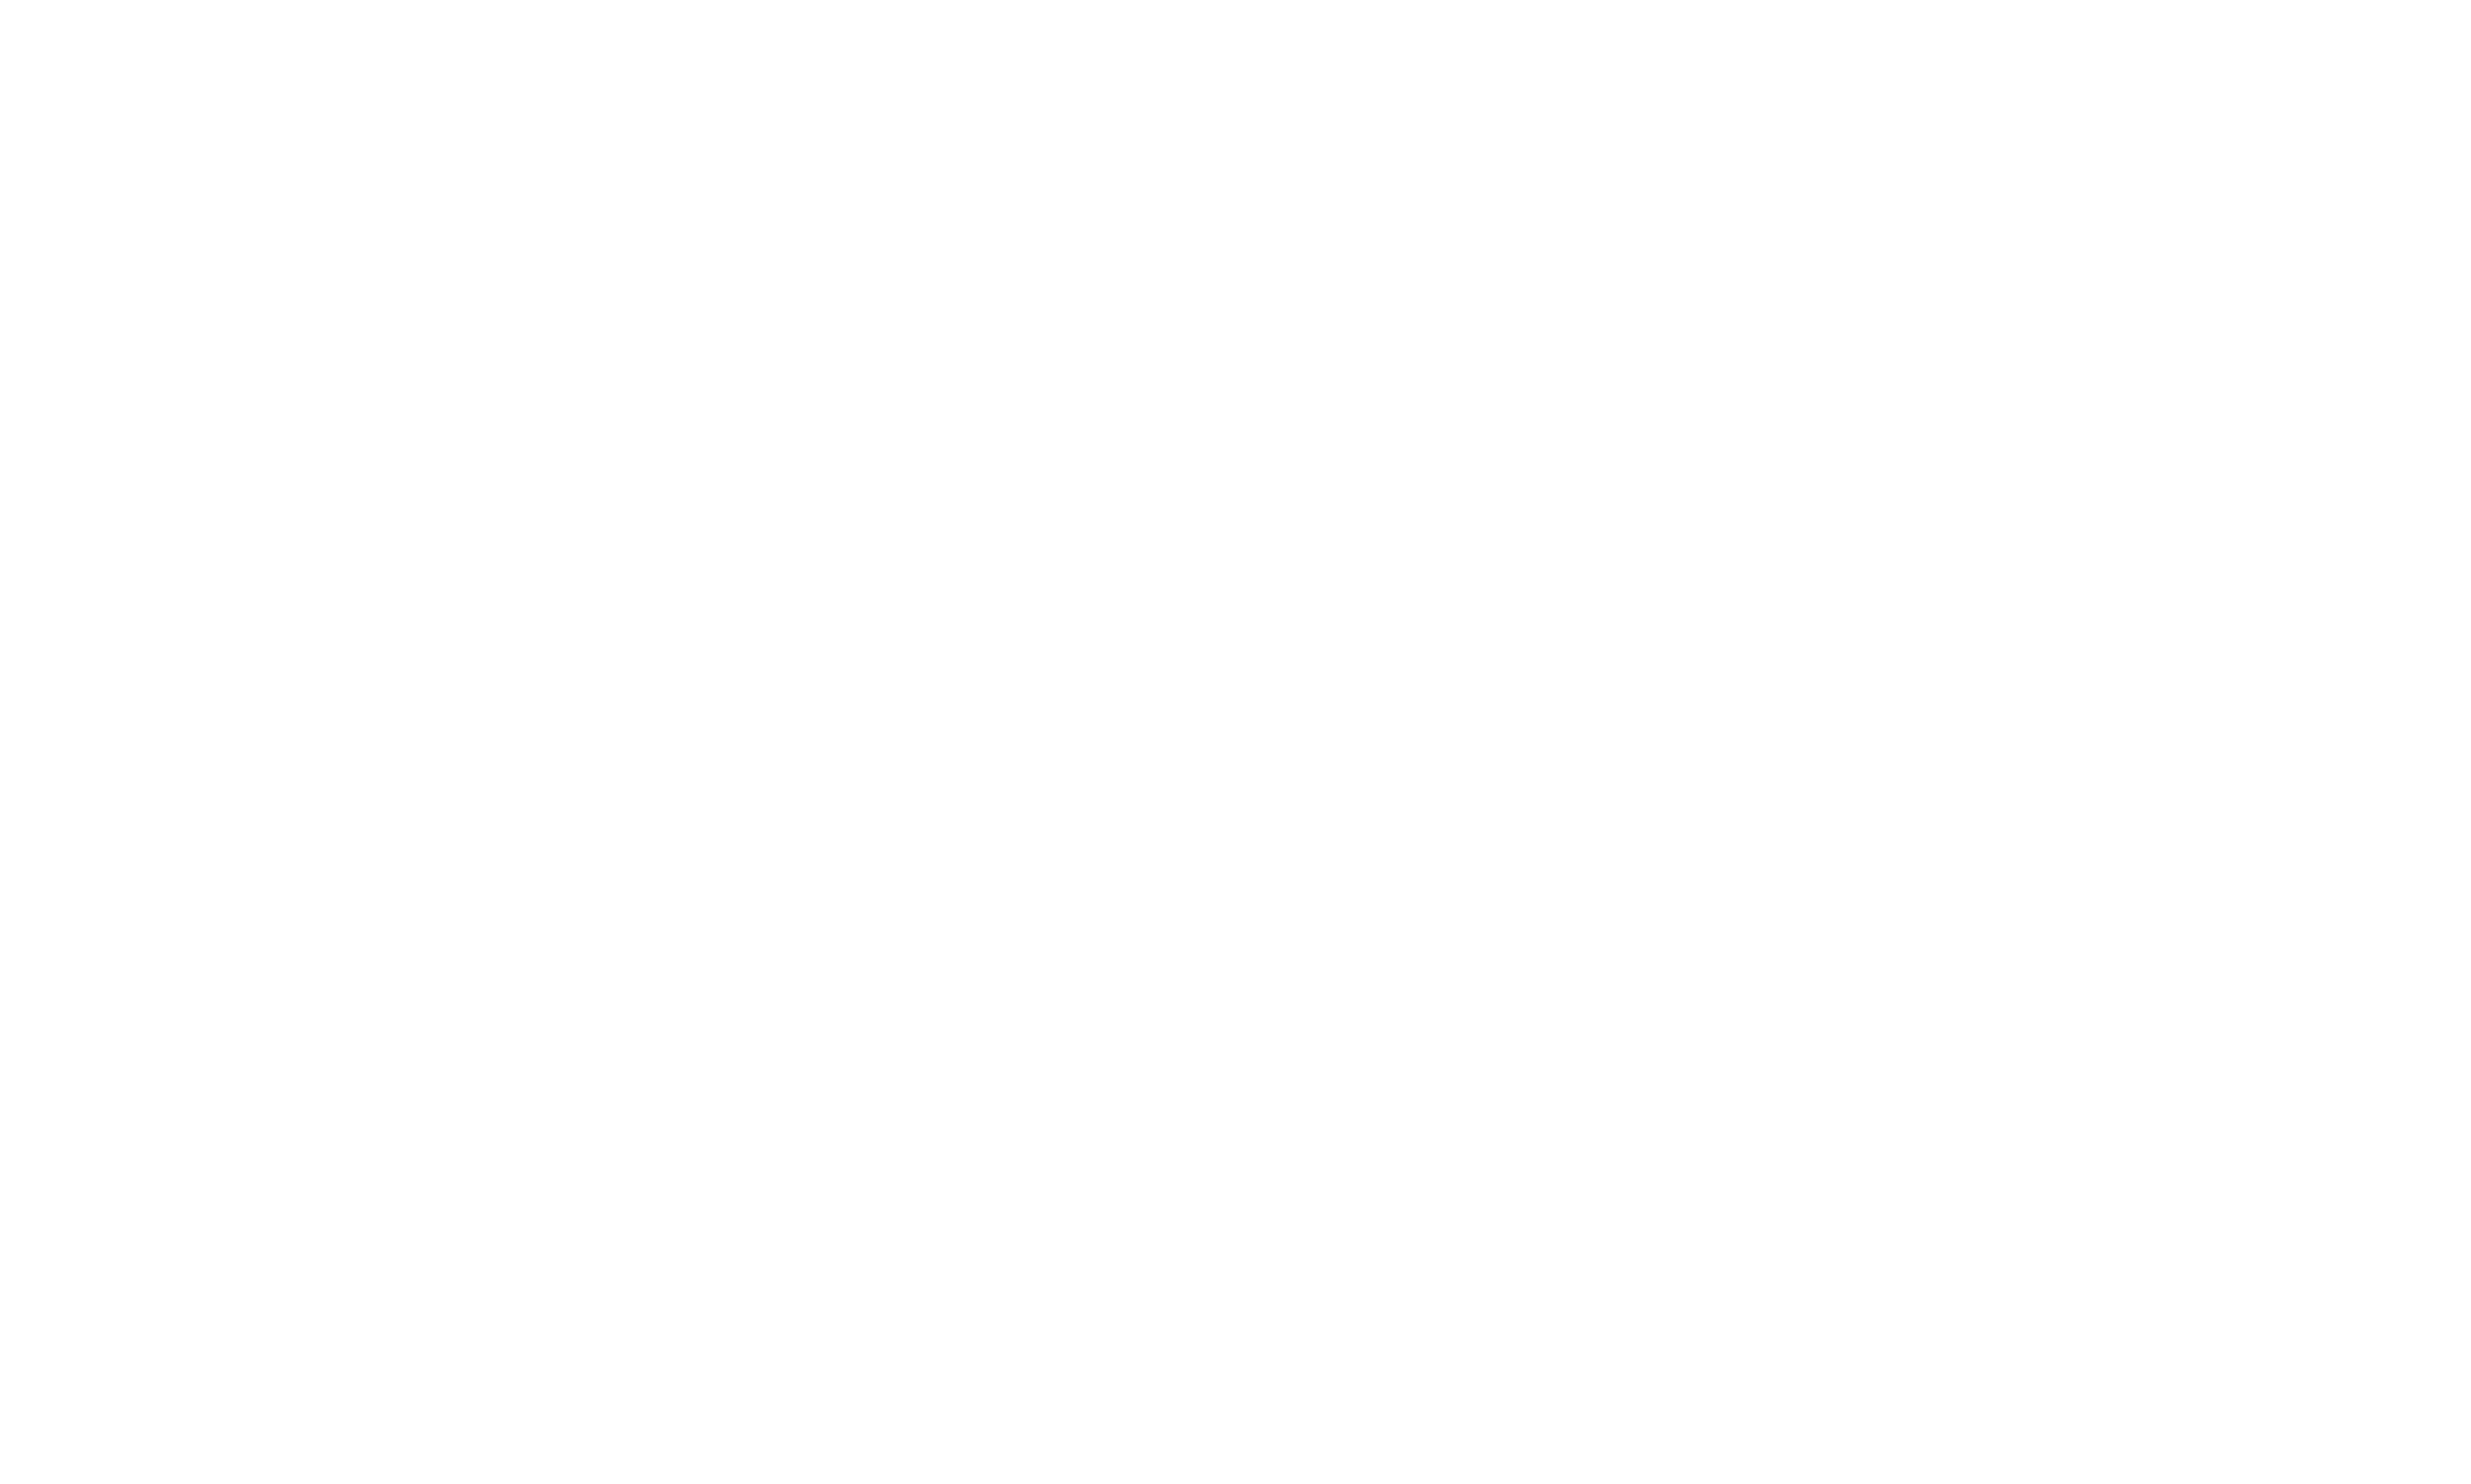 Fire Peashooter Plants Vs Zombies 2 Coloring Pages Peashooters